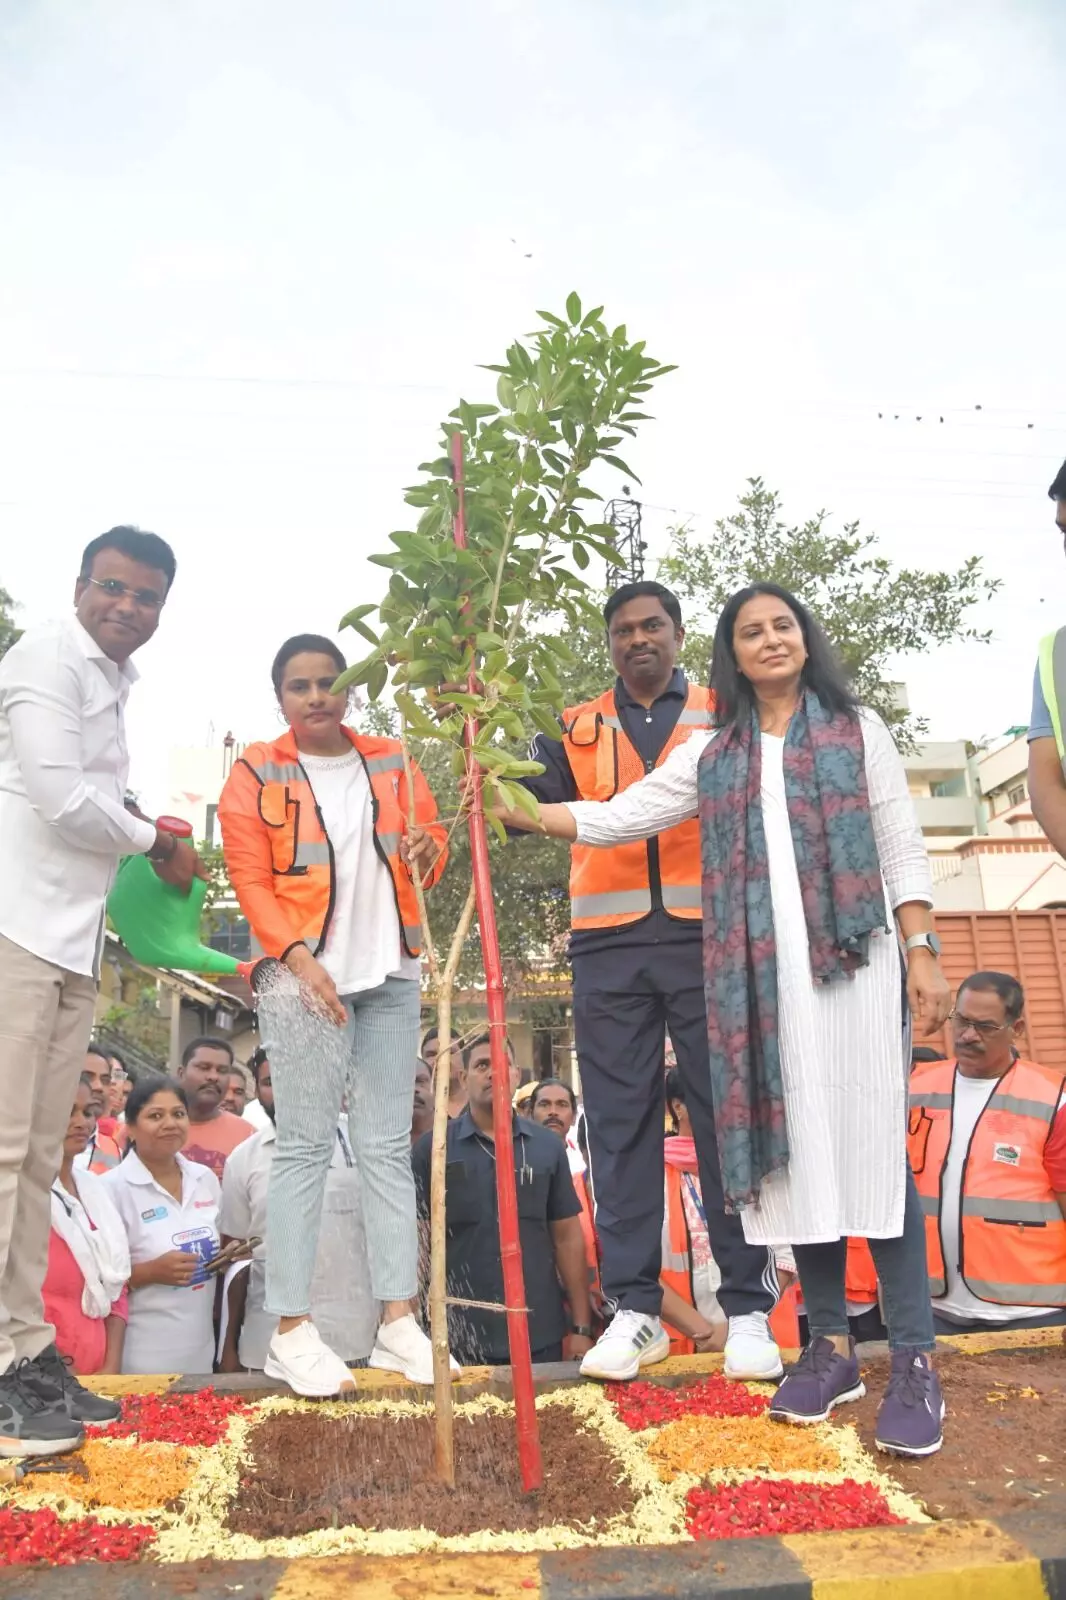 GHMC to increase median, avenue plantation drives in Hyderabad